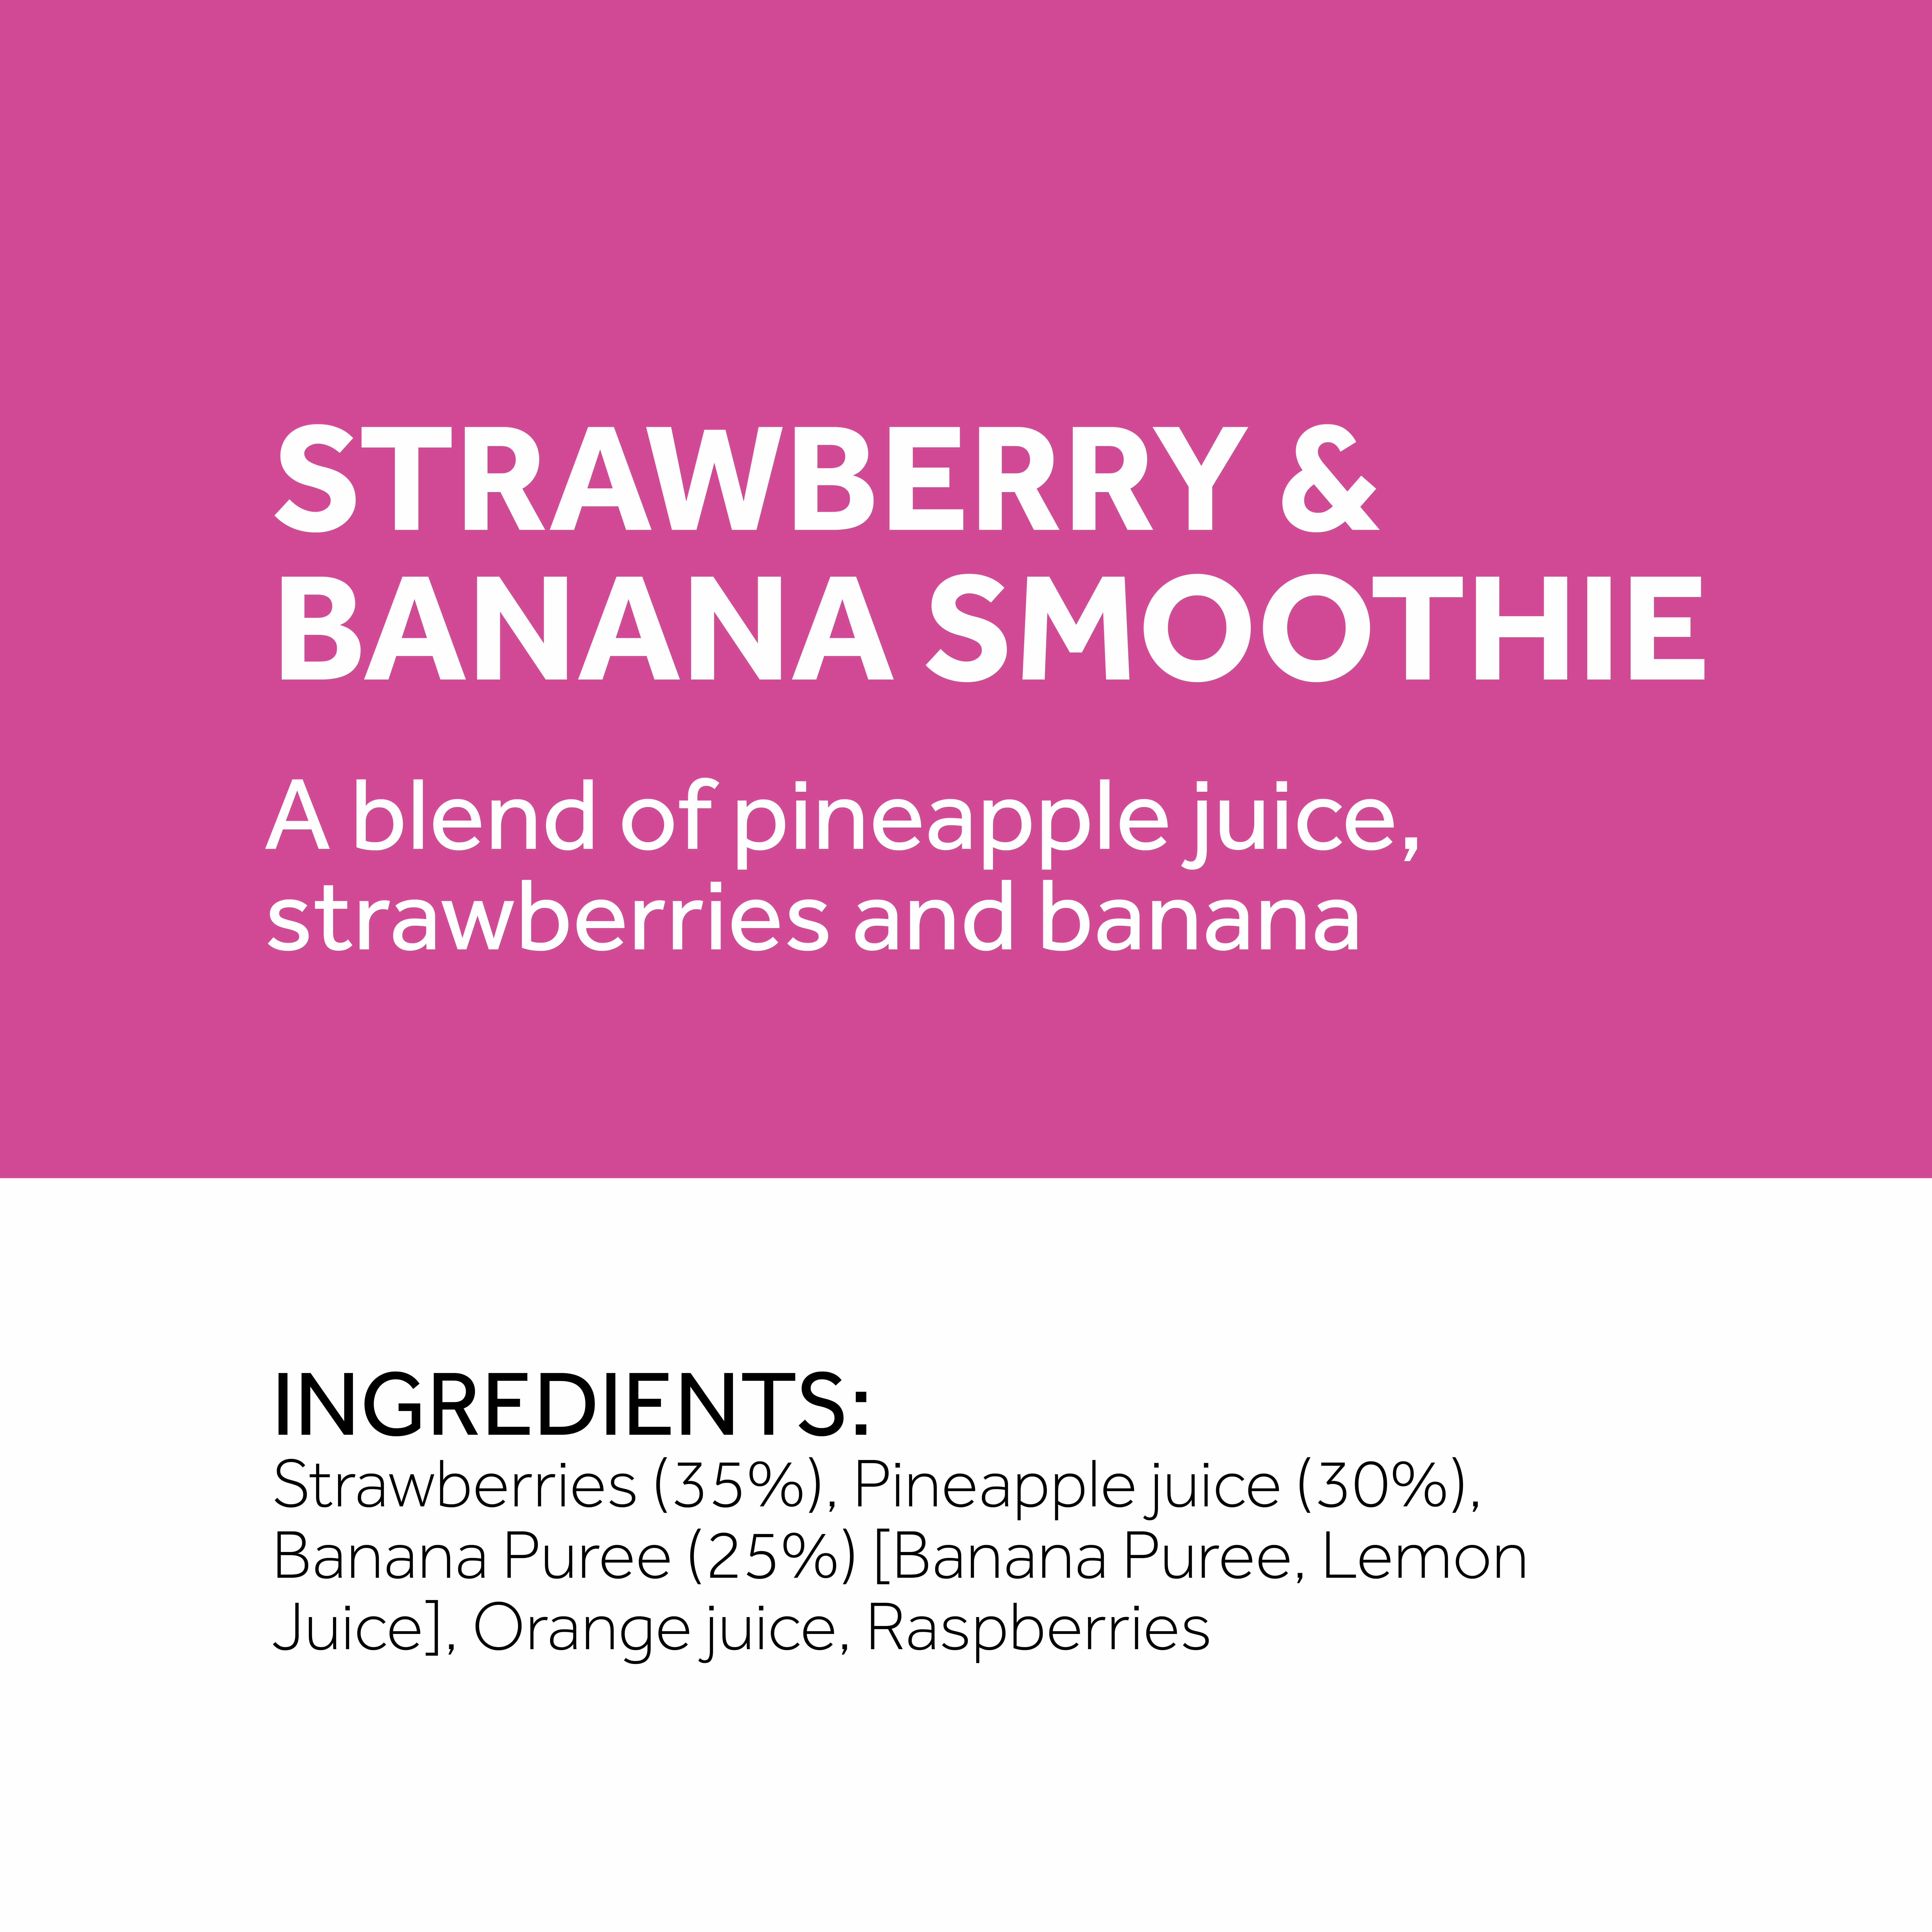 section from a strawberry and banana smoothie label displaying ingredients list which contains percentages of strawberries, pineapple juice and banana puree